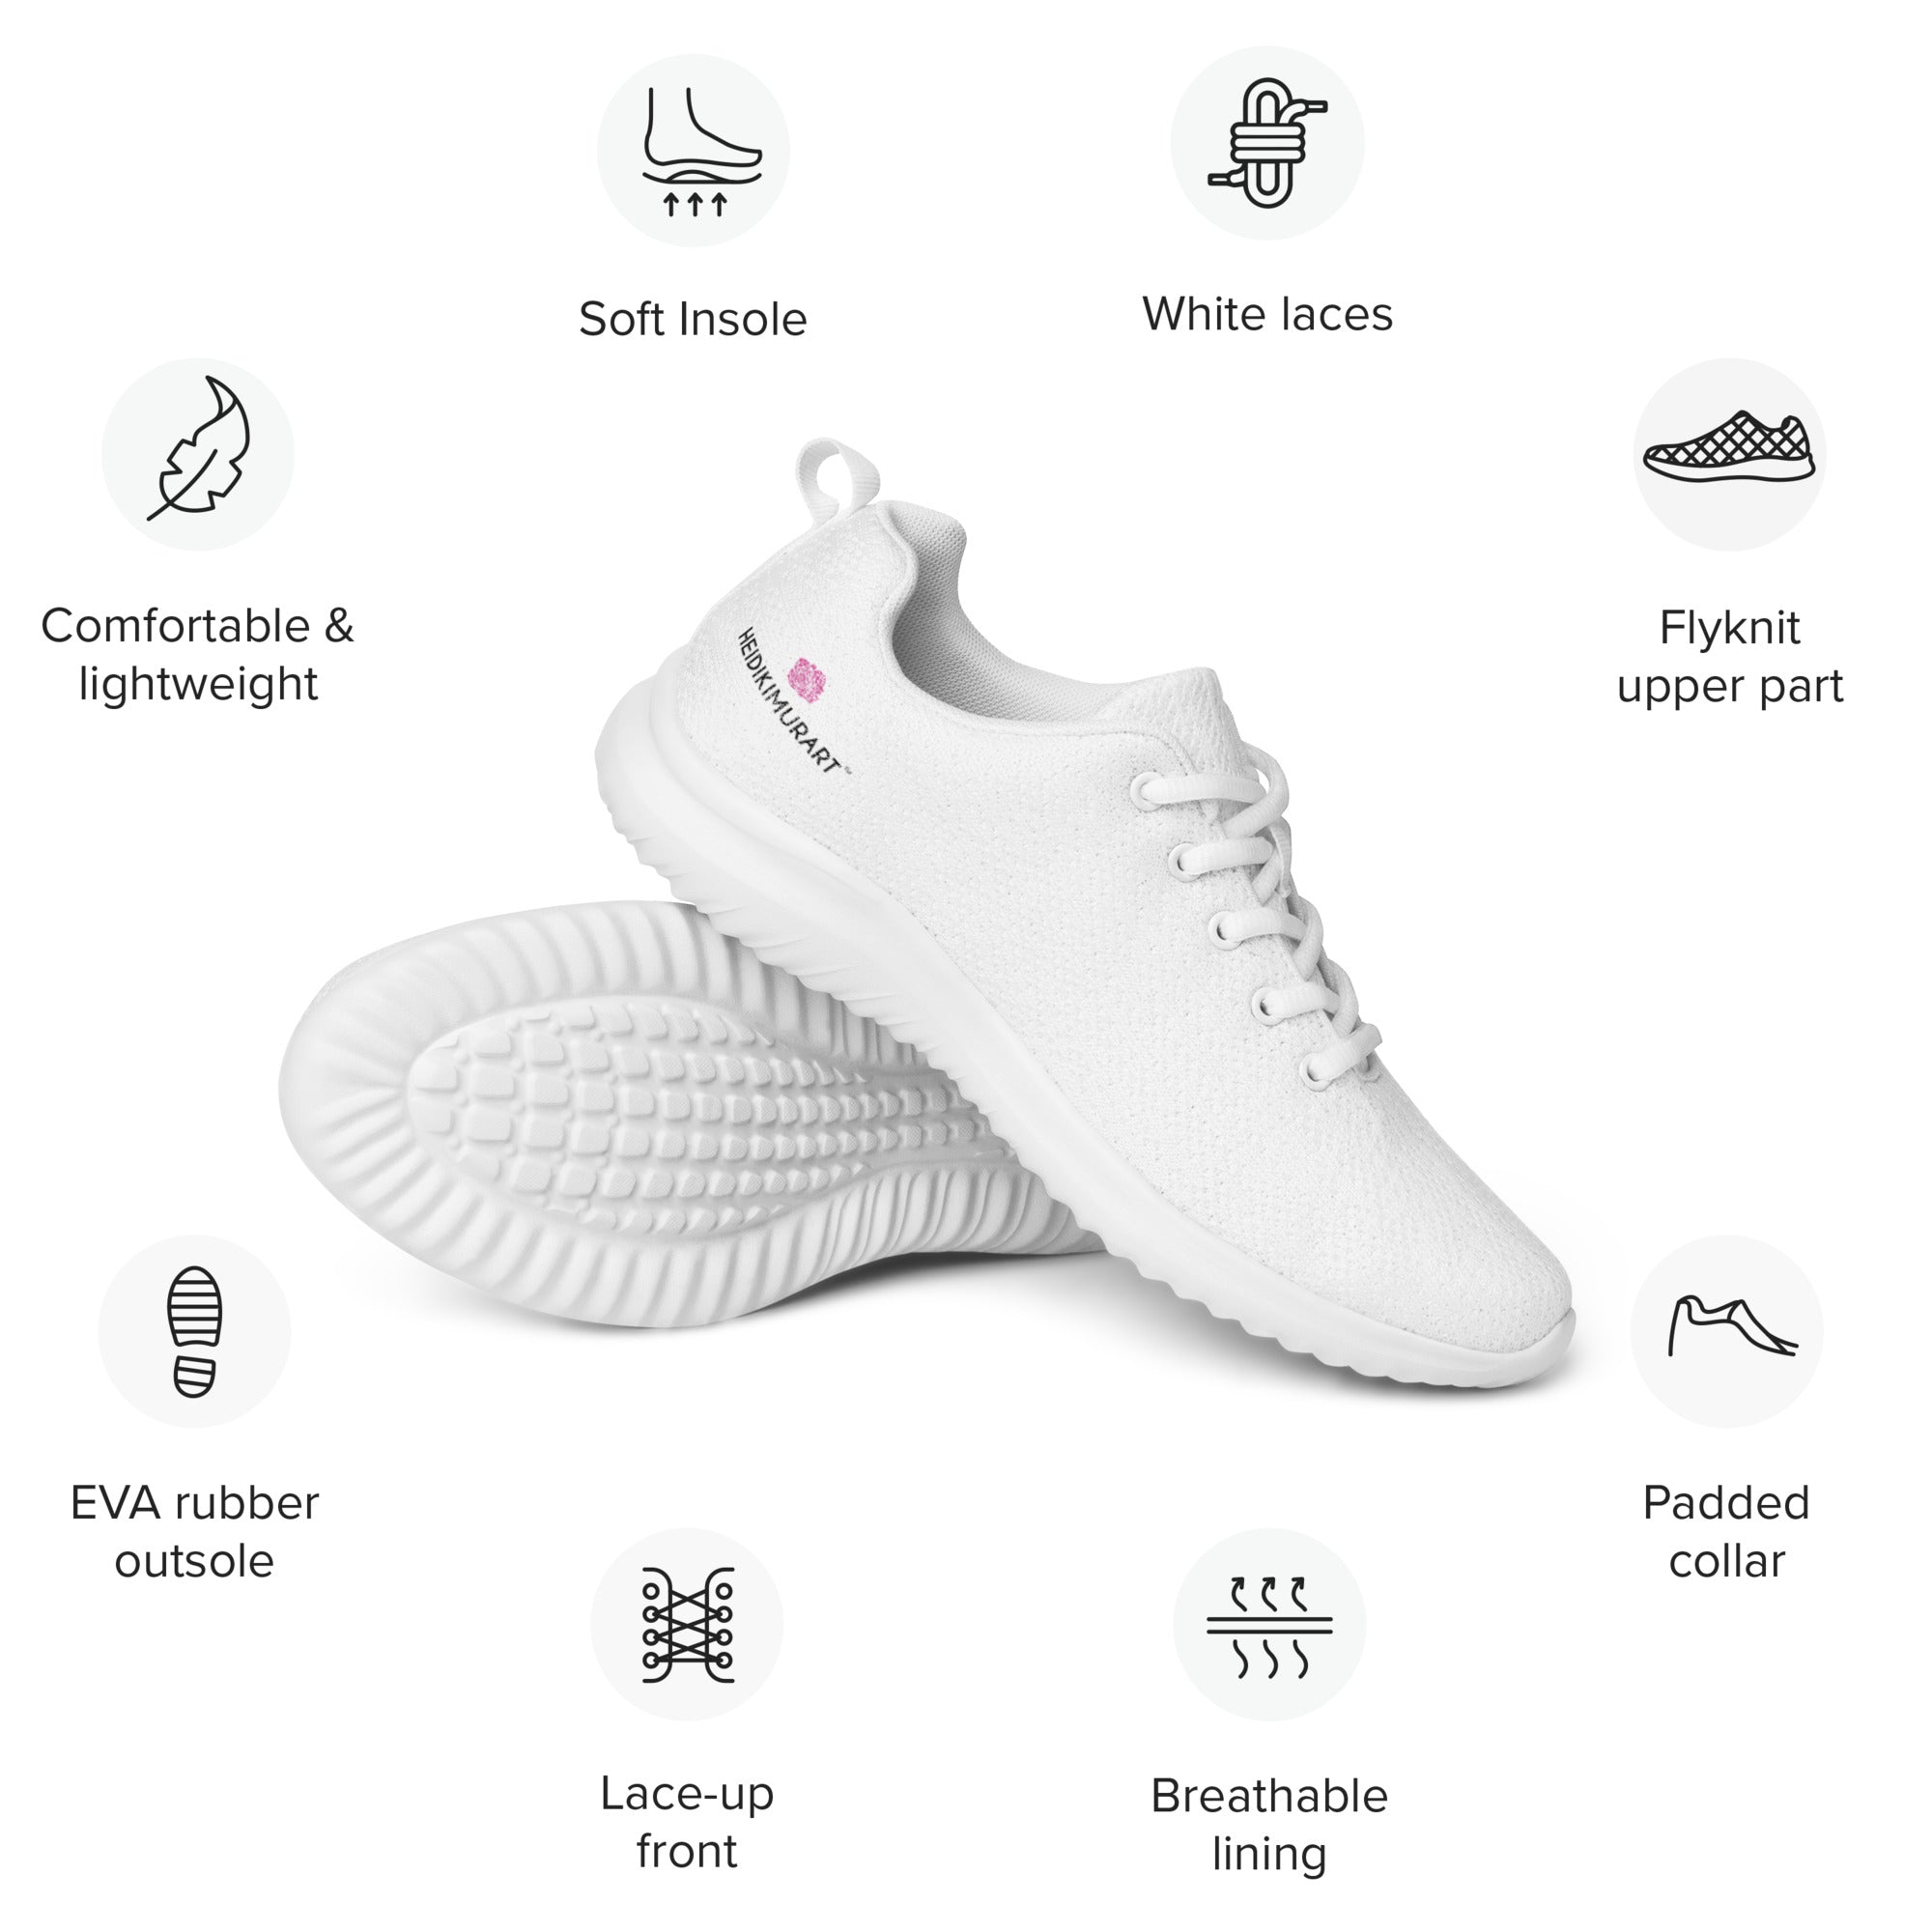 White Solid Color Men's Sneakers, Solid Color Modern Breathable Lightweight Best Premium Designer Men’s Lace-up Low Top Sneakers, Modern Essential Classic Every Day Best Quality Fashionable Running Casual Canvas Breathable Comfortable Running Shoes With White Laces (US Size: 5-13)